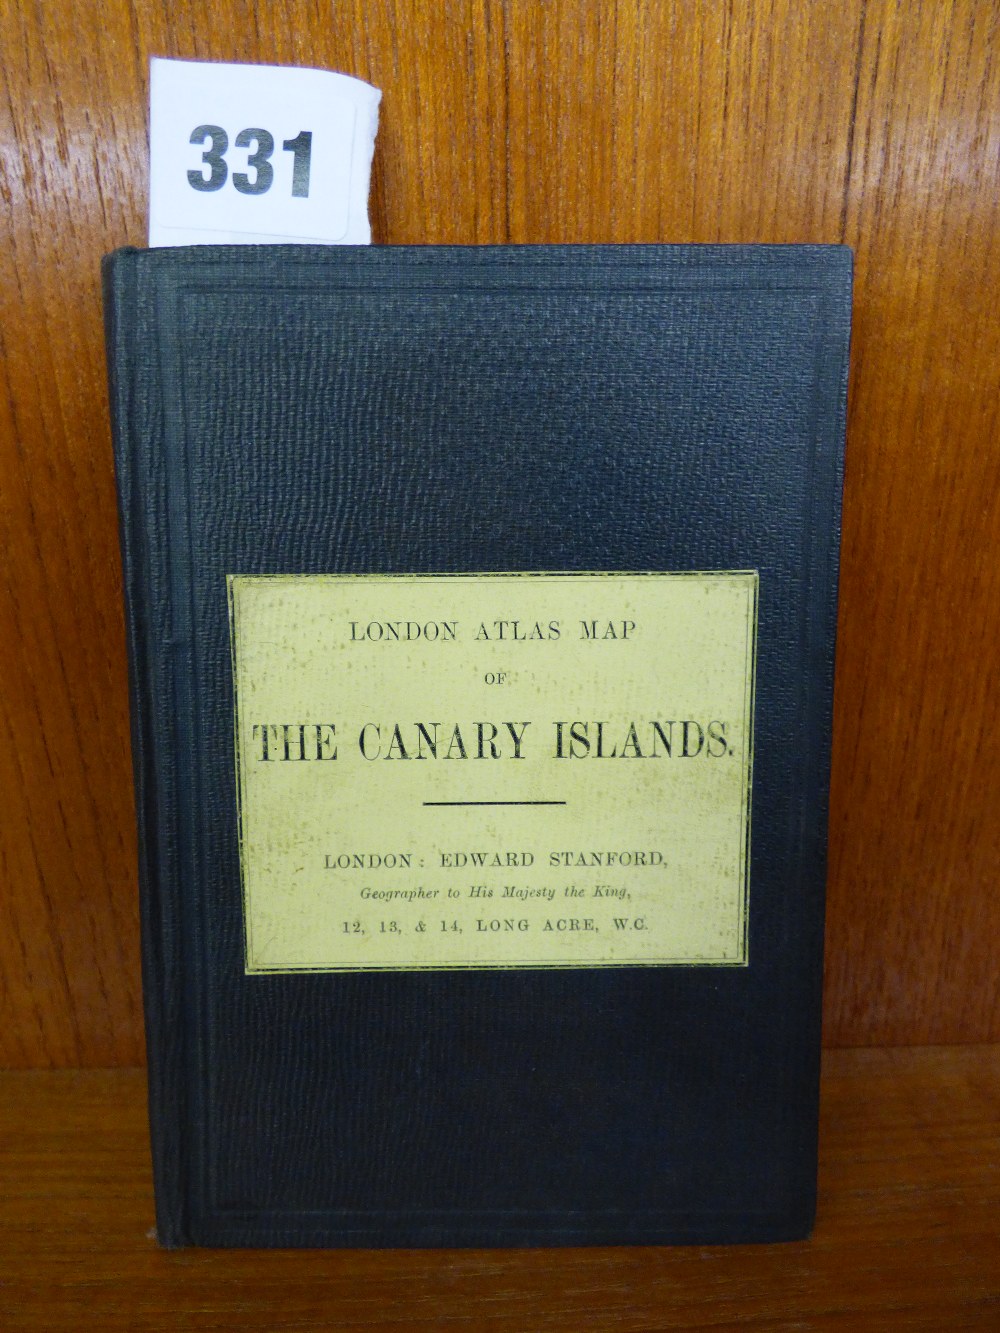 LONDON ATLAS MAP OF THE CANARY ISLANDS BY EDWARD STANOFORD